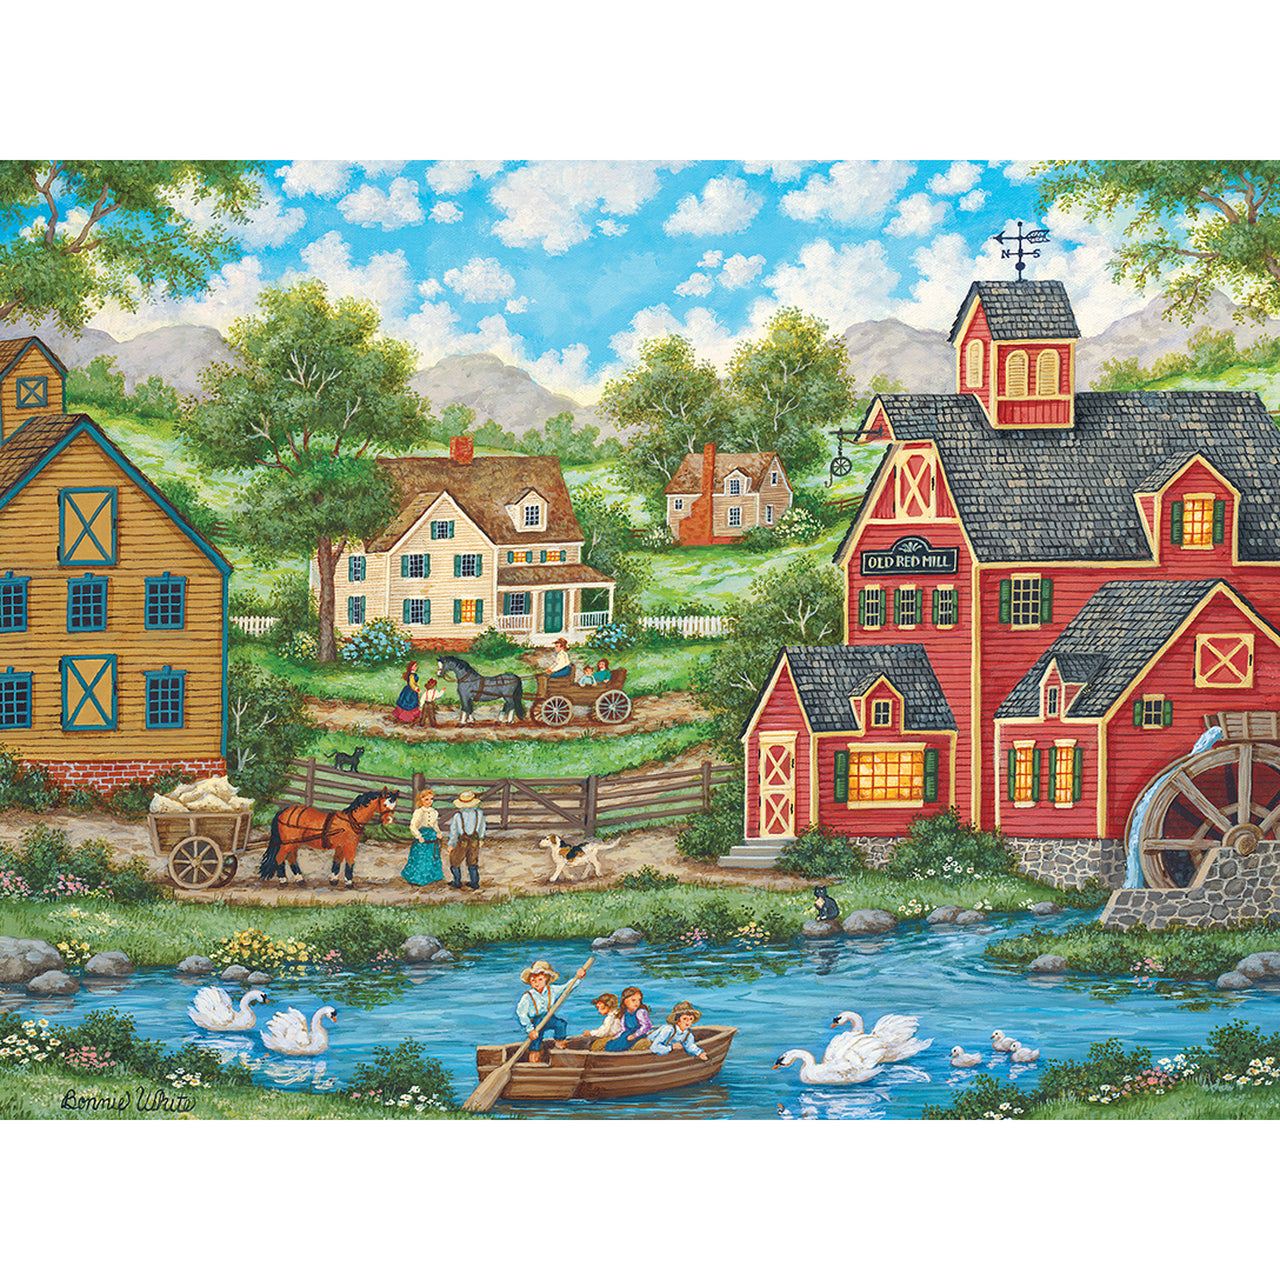 Heartland Collection Swan Pond - 550 Piece Jigsaw Puzzle by Masterpieces